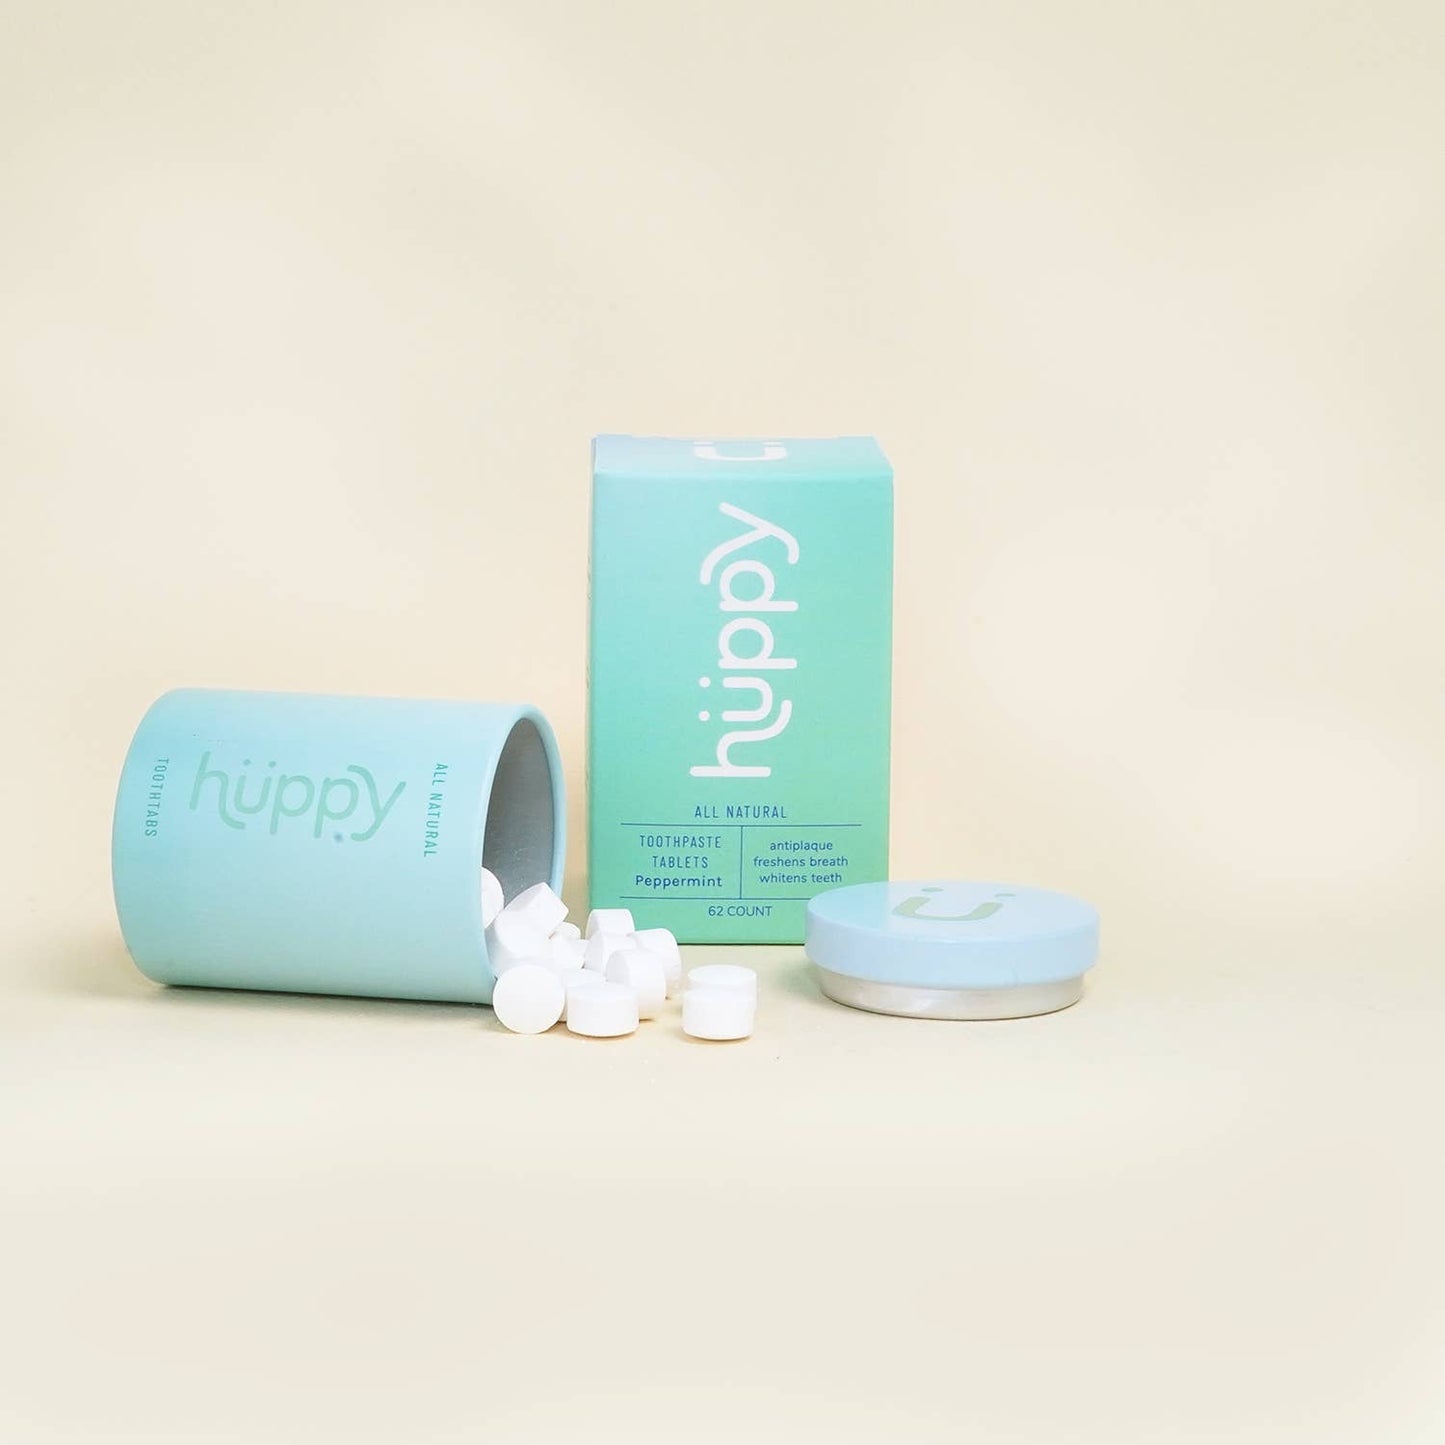 Toothpaste Tablets - Peppermint - Box Huppy